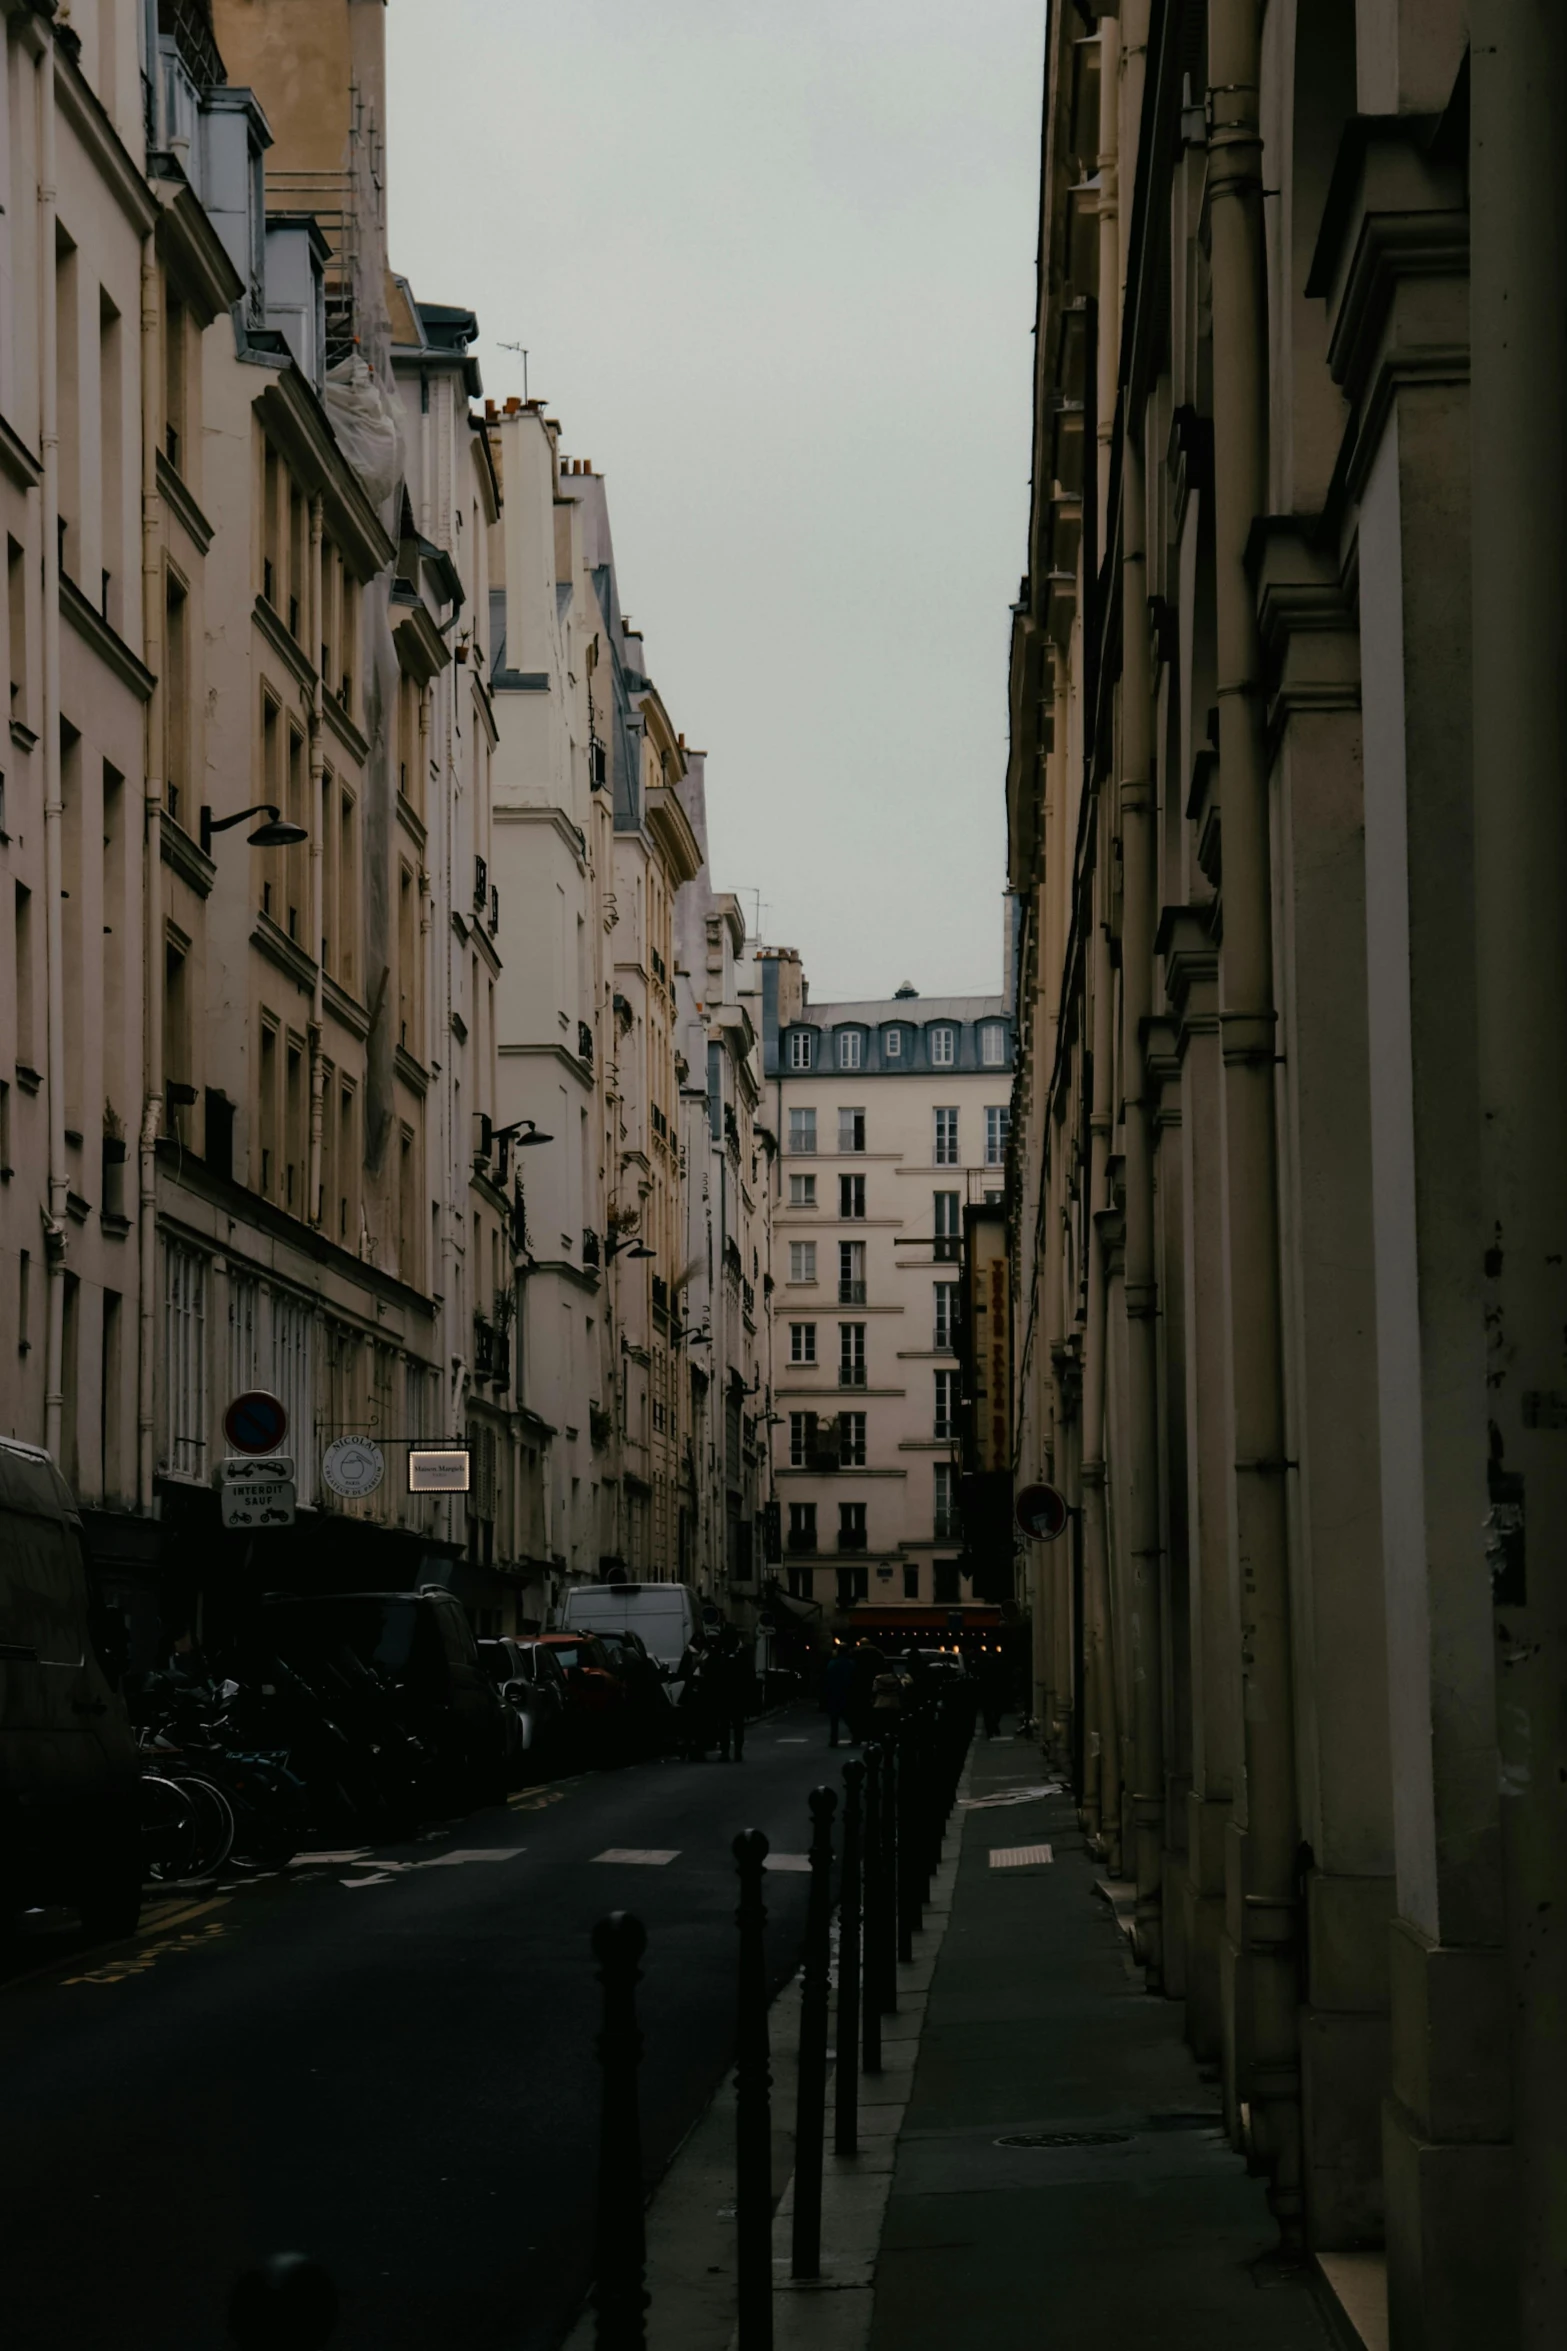 a narrow city street lined with tall buildings, a photo, pexels contest winner, paris school, barely visible from the shadows, nice slight overcast weather, neighborhood, gothic city streets behind her